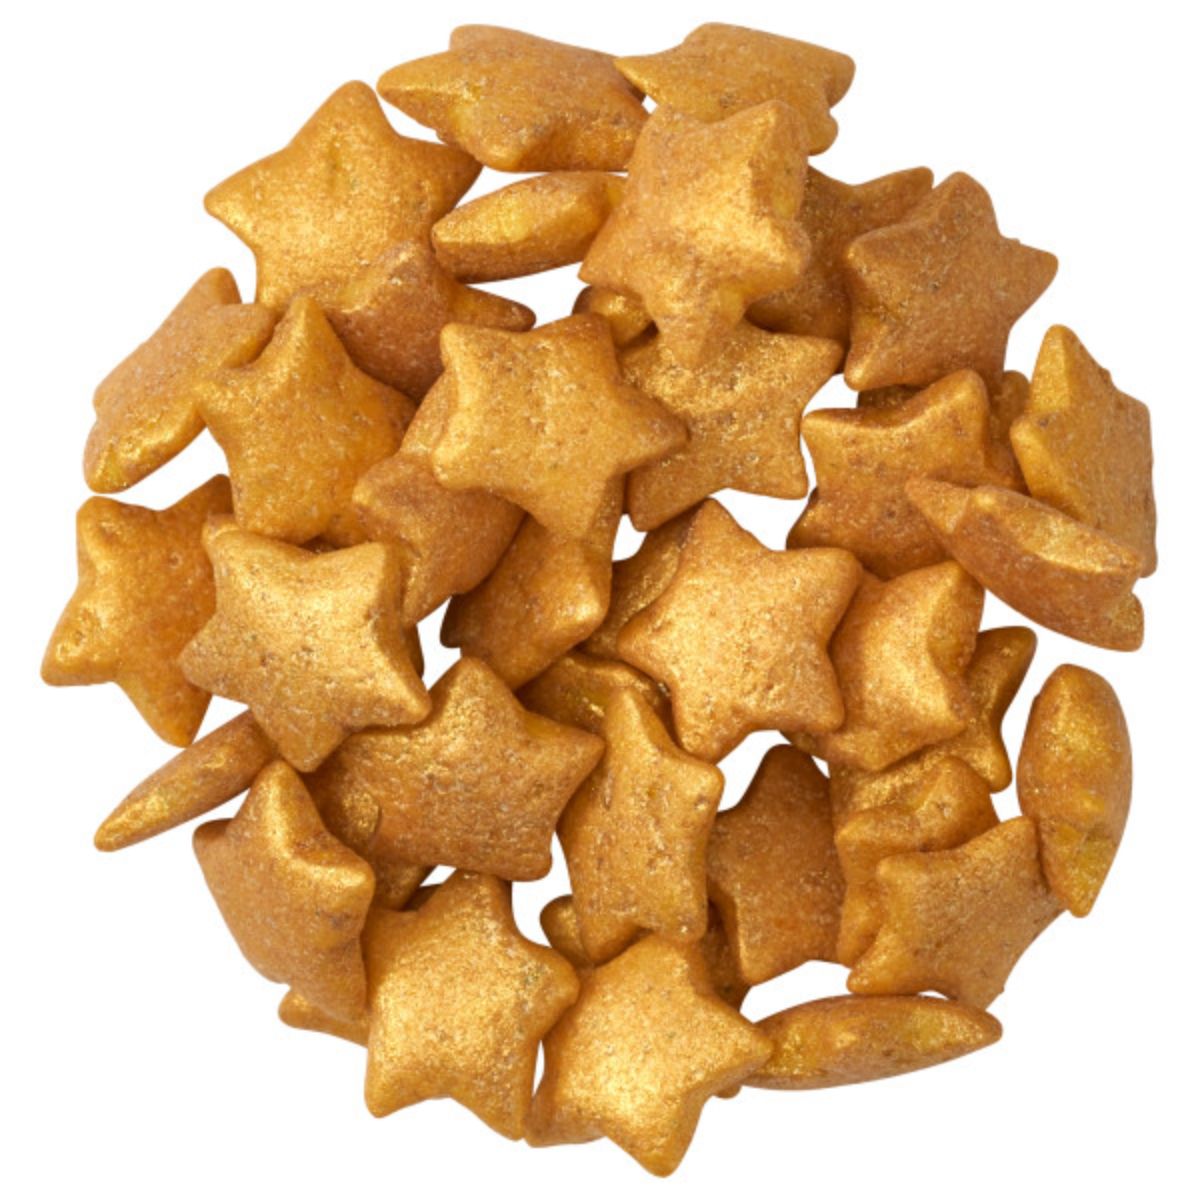 Decopac Gold Stars Quins Edible Cupcake Sprinkles Sugar Cake Decorations - 18.5 Ounce